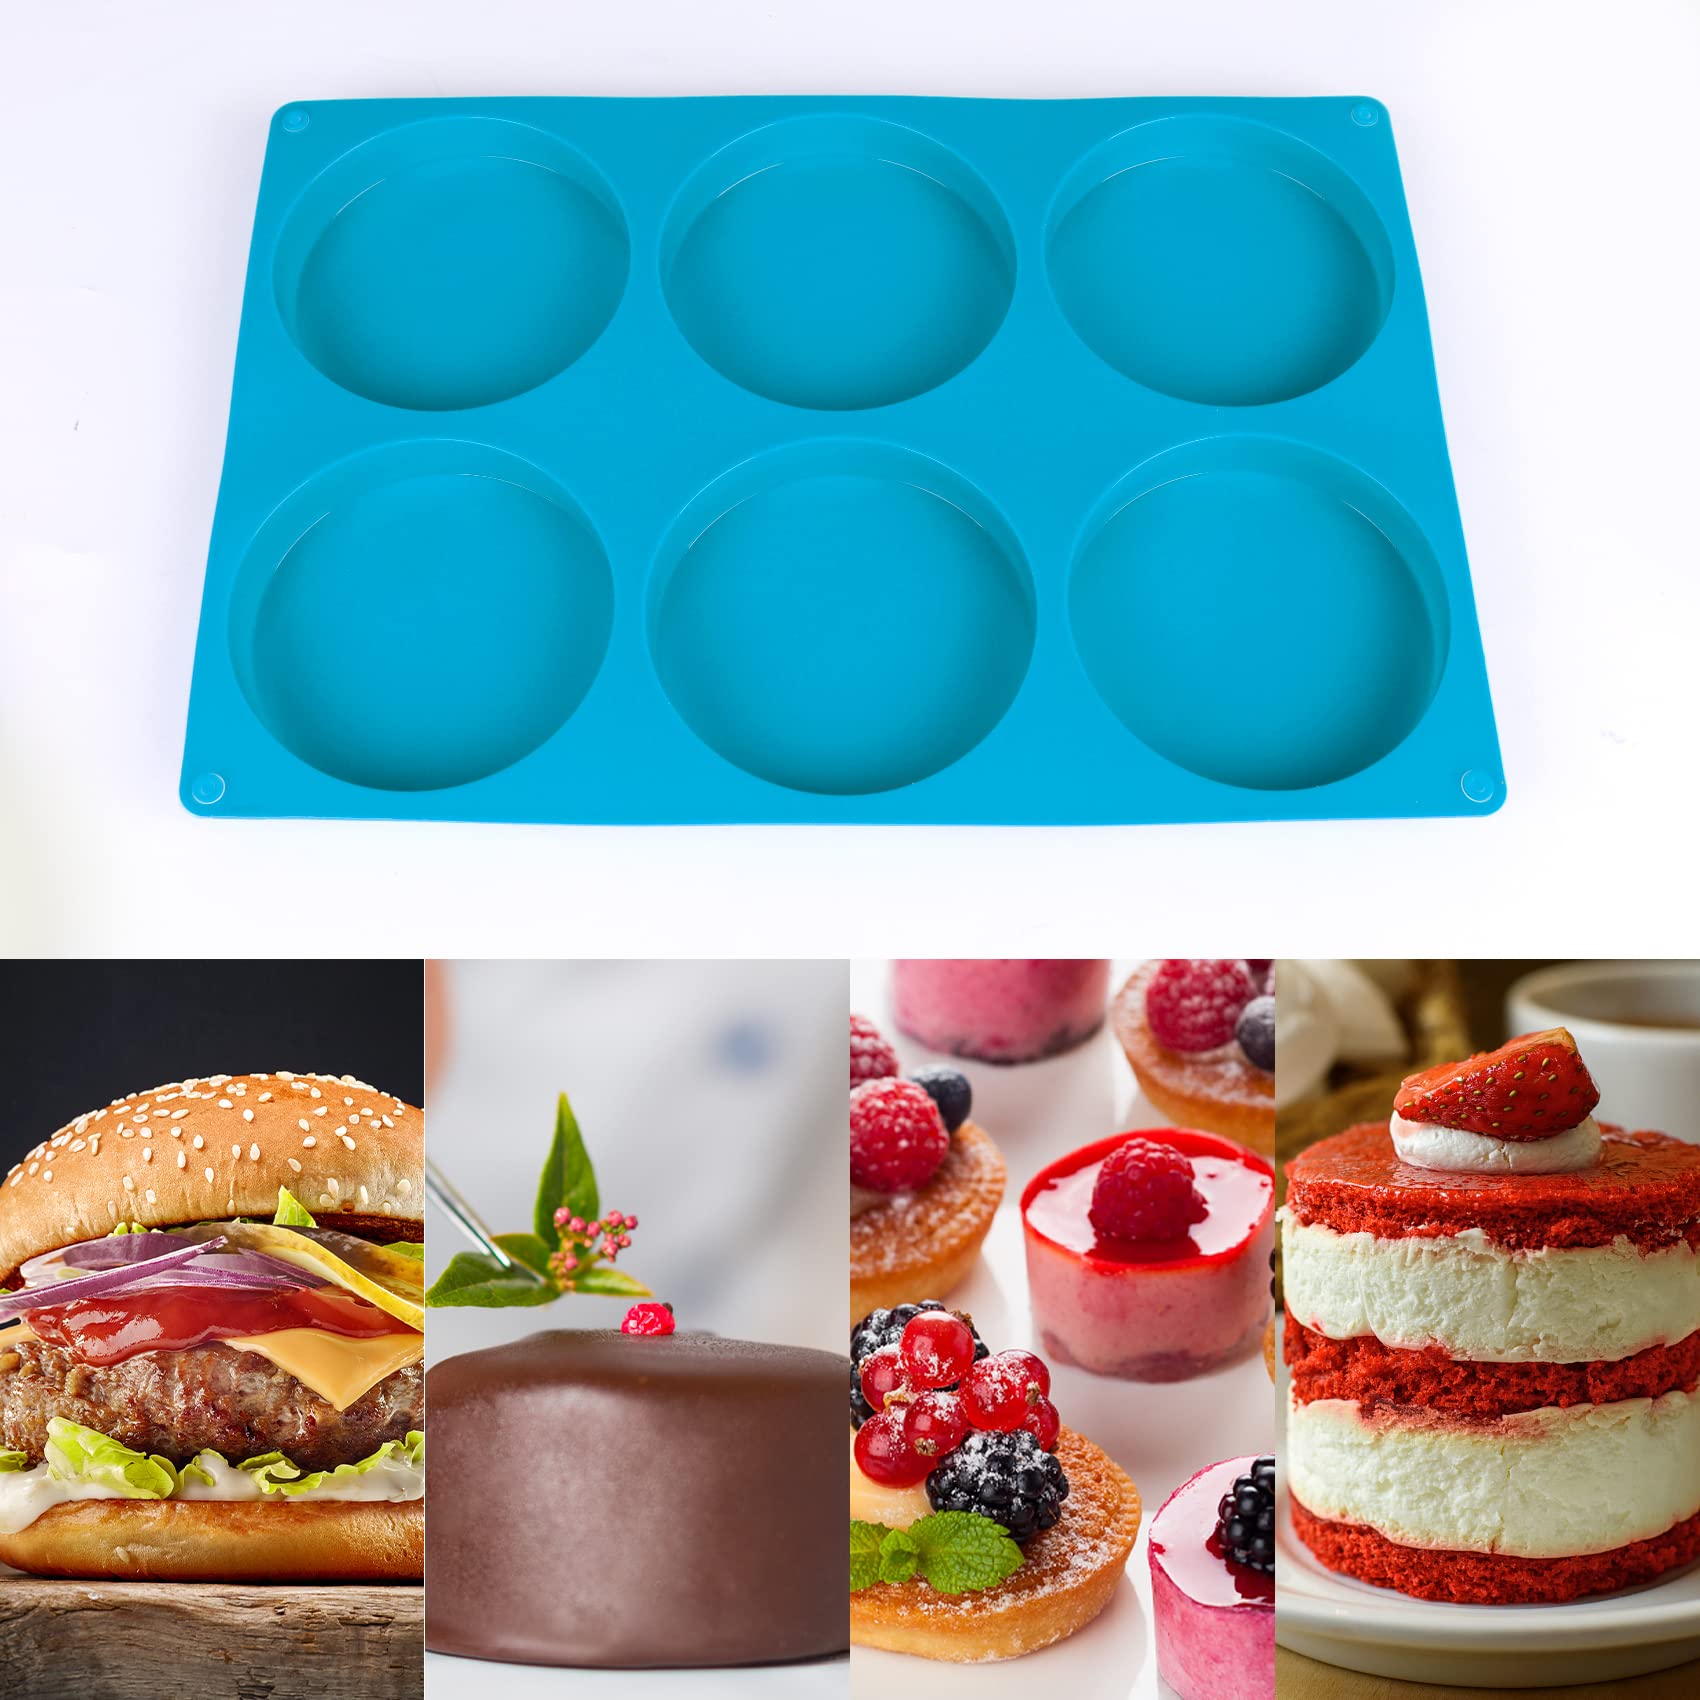 2 Pcs Large Silicone Molds for Baking, 6-Cavity Round Silicone Baking Mold, Non-Stick 4” Baking Disc Molds for Whoopie Pie, Egg Pan,Muffin, Candy, Soap, Hamburger, Resin Coasters (Blue)